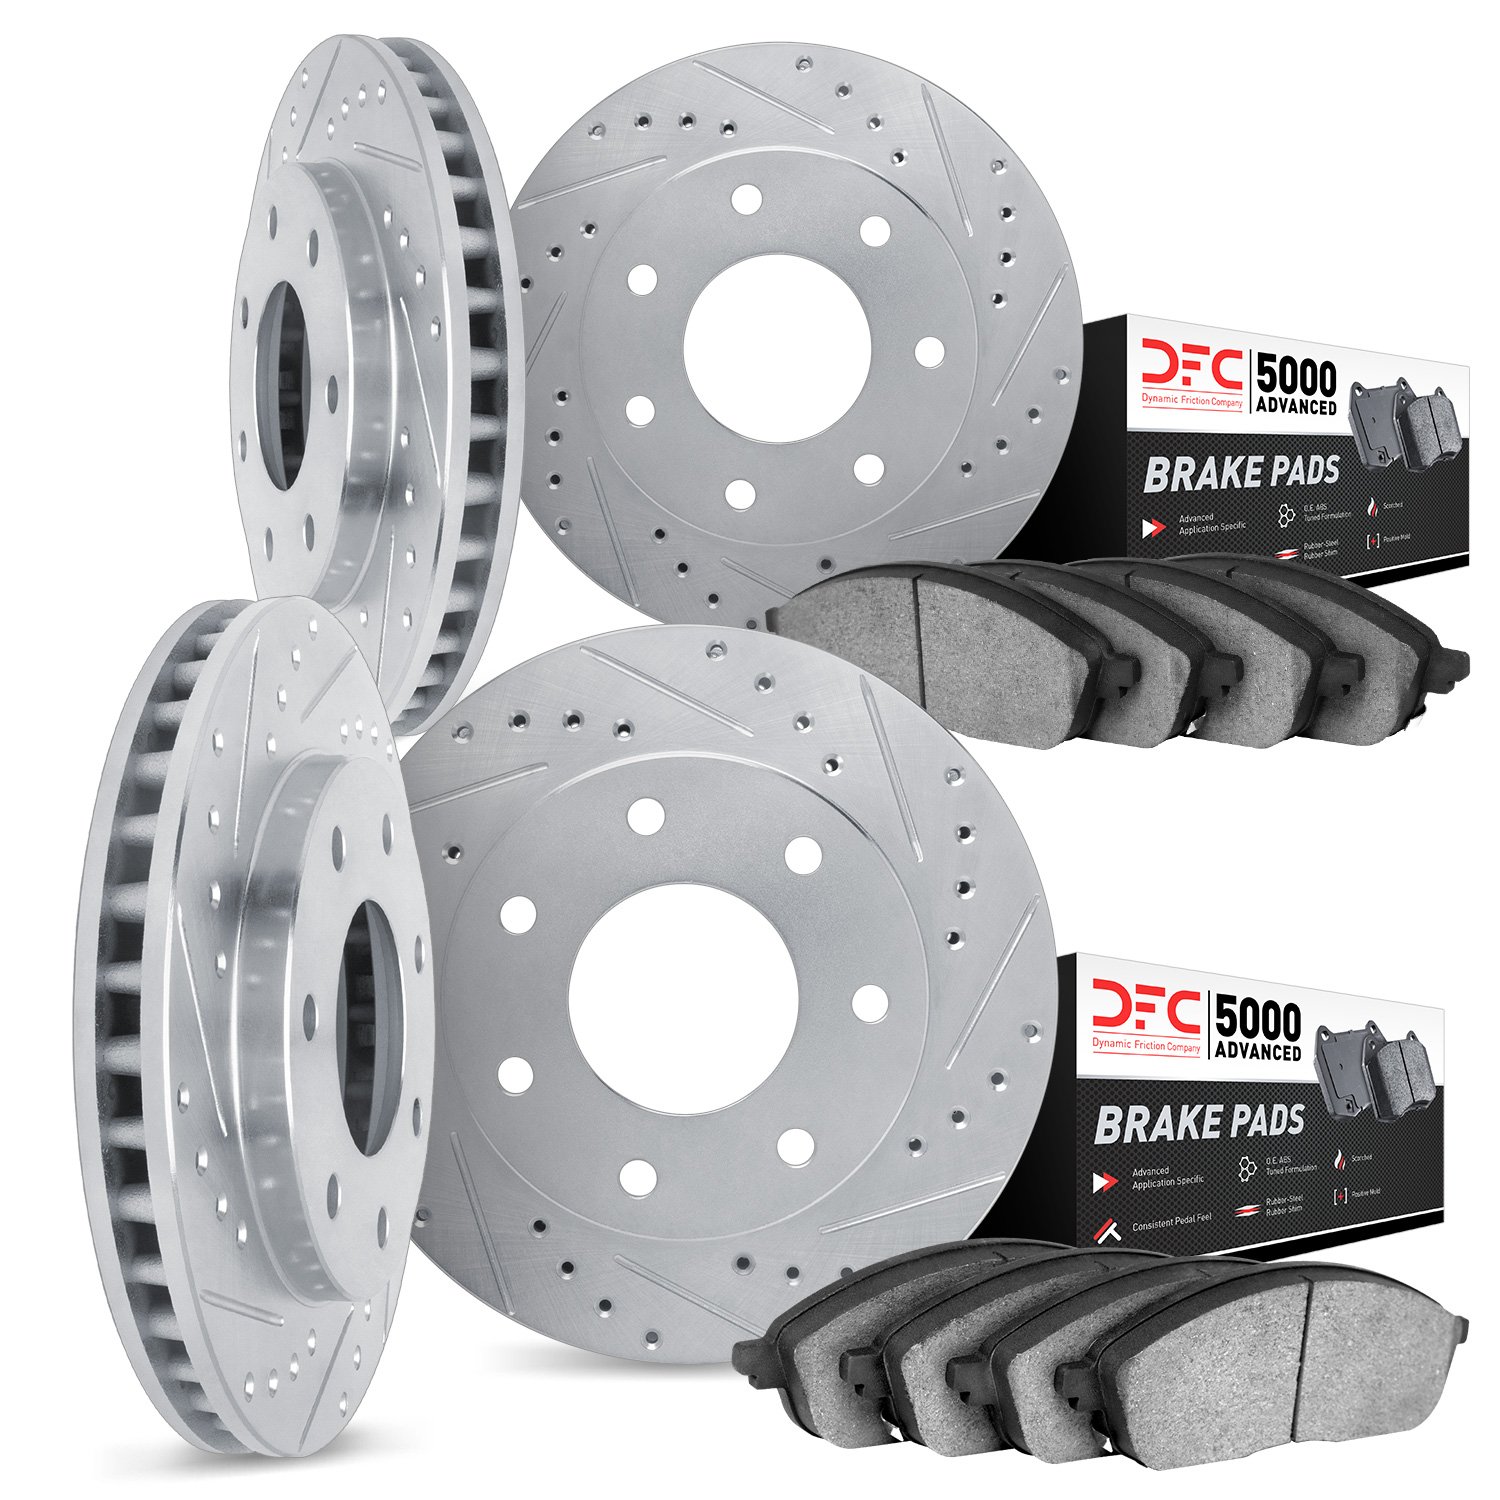 7504-54356 Drilled/Slotted Brake Rotors w/5000 Advanced Brake Pads Kit [Silver], 2009-2009 Ford/Lincoln/Mercury/Mazda, Position: